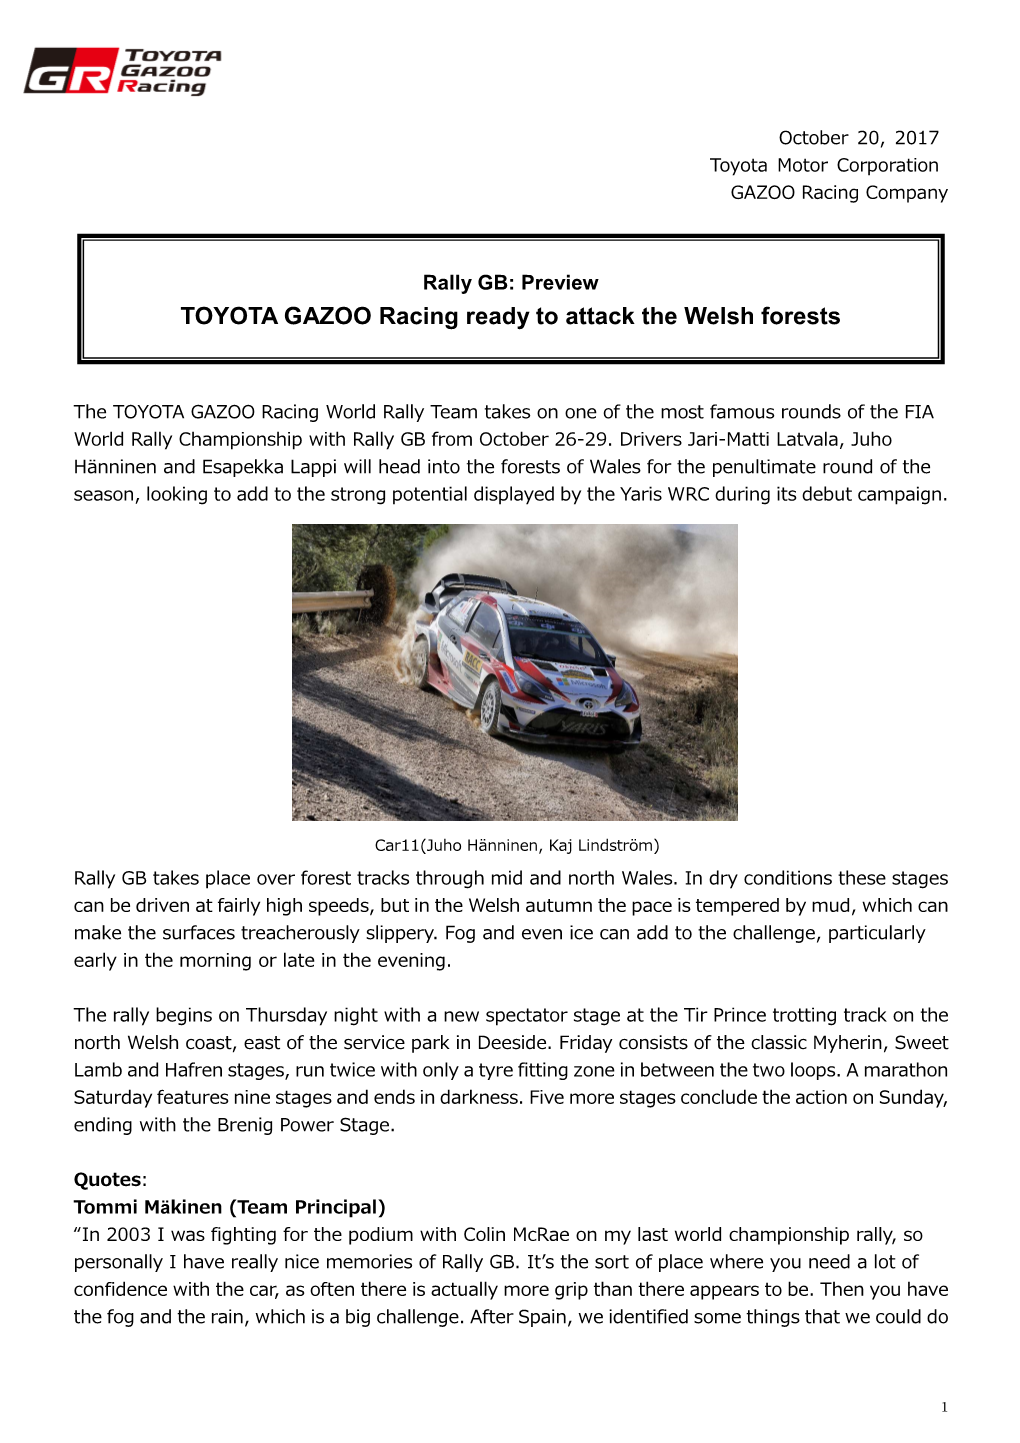 Toyota GB Preview